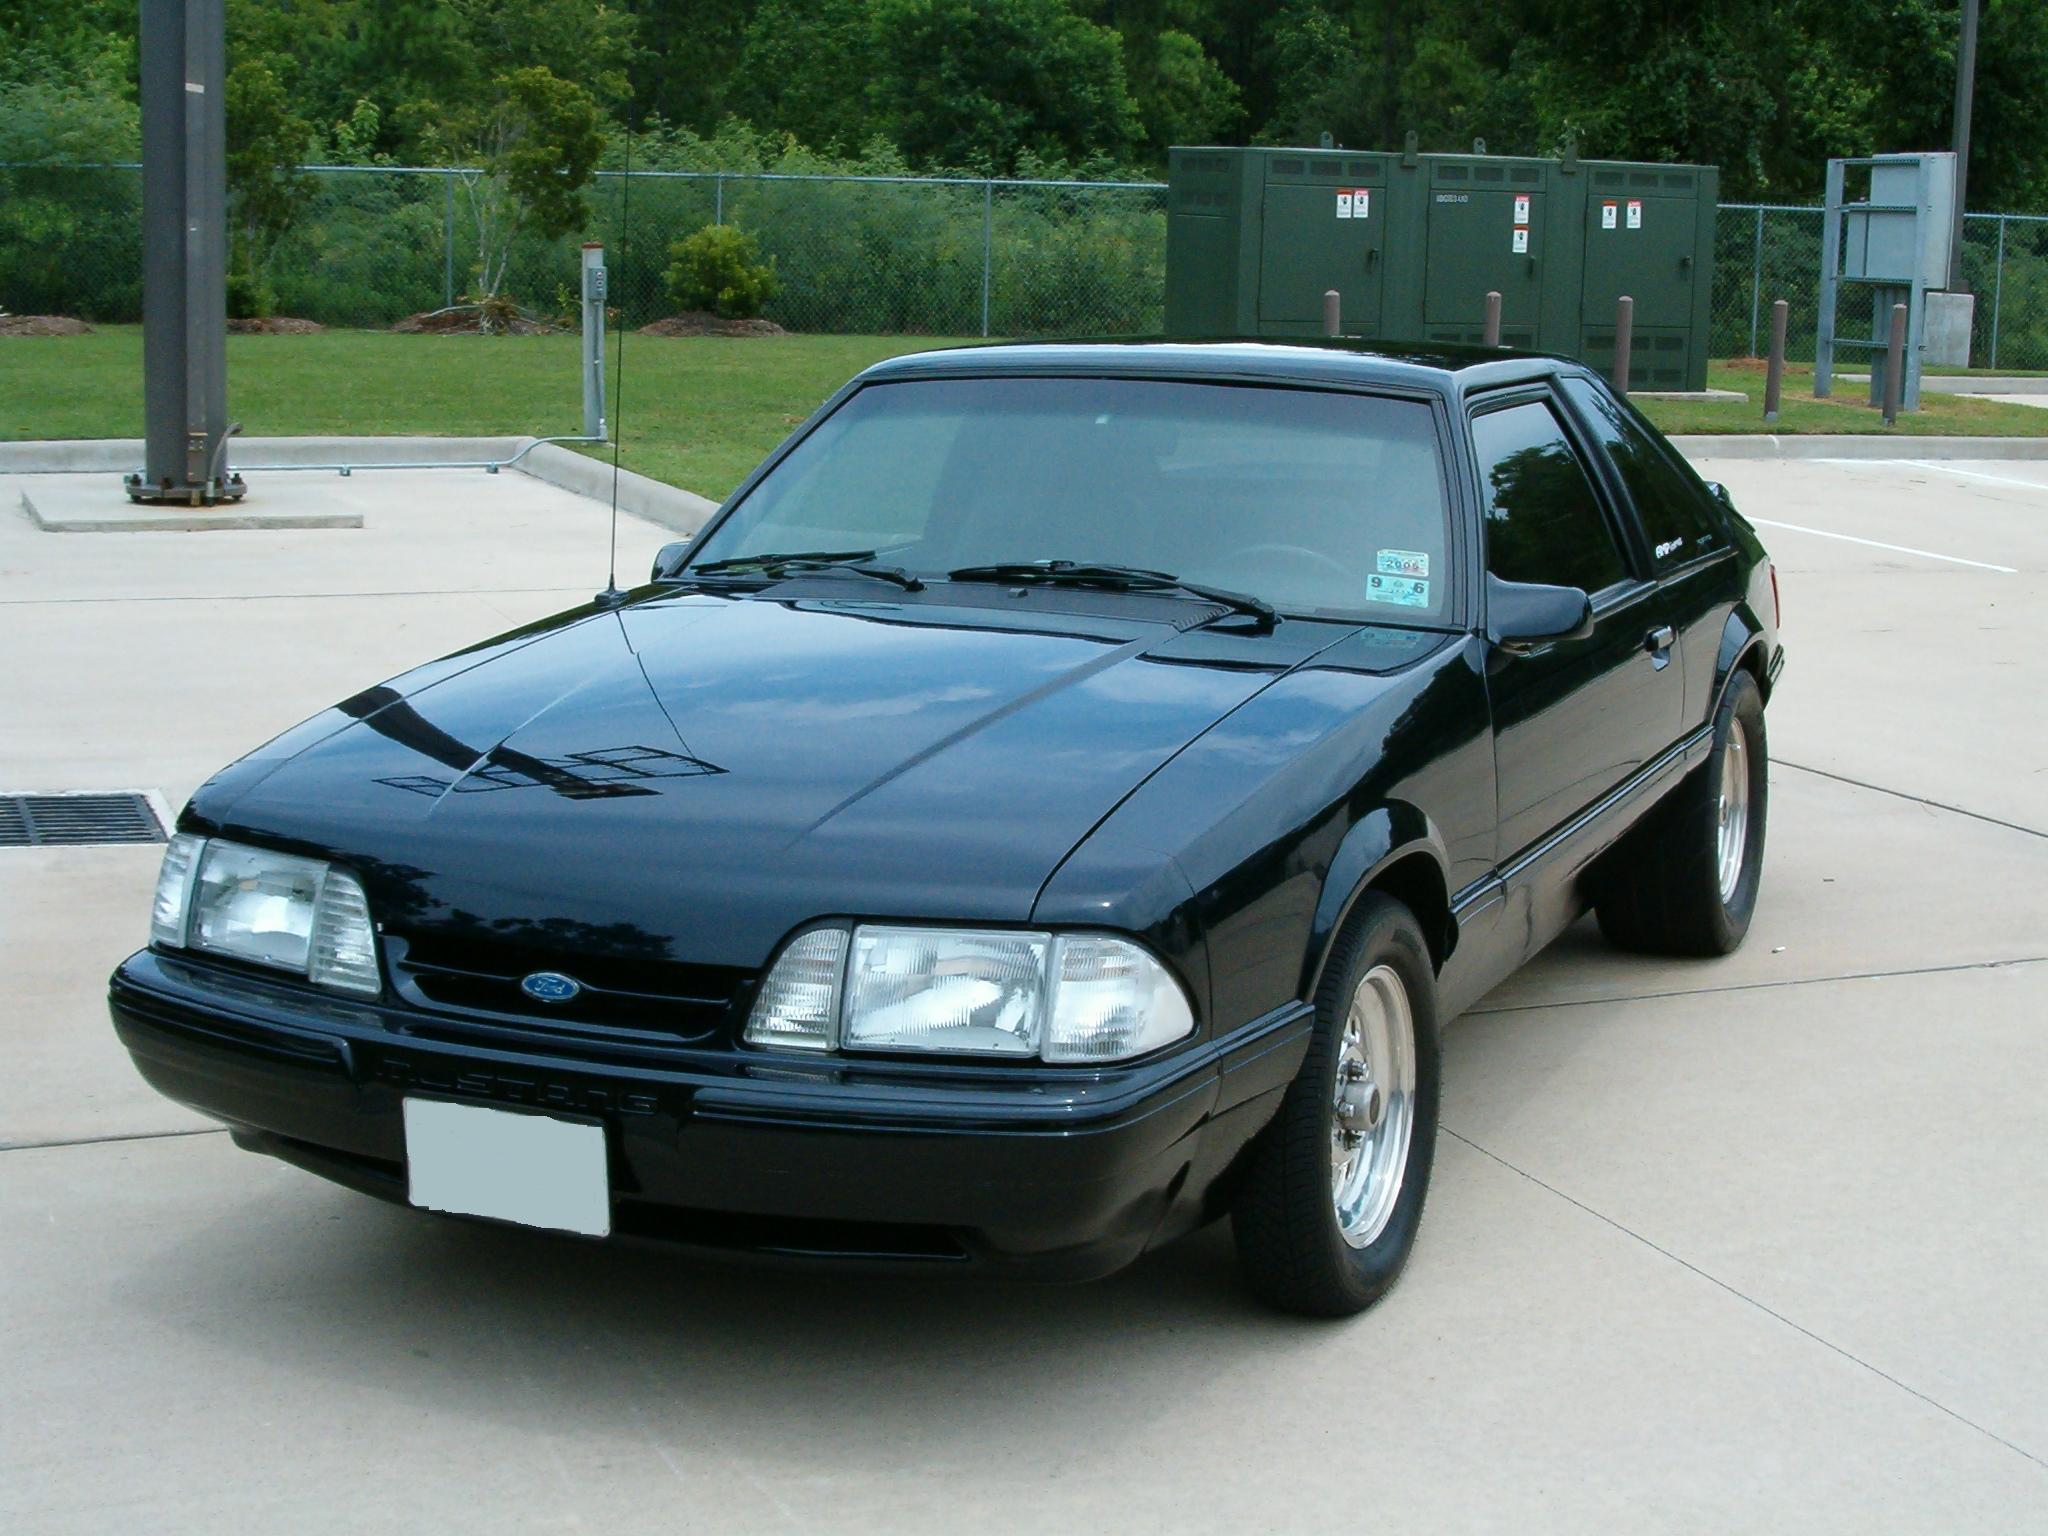  1989 Ford Mustang LX Hatchback Nitrous